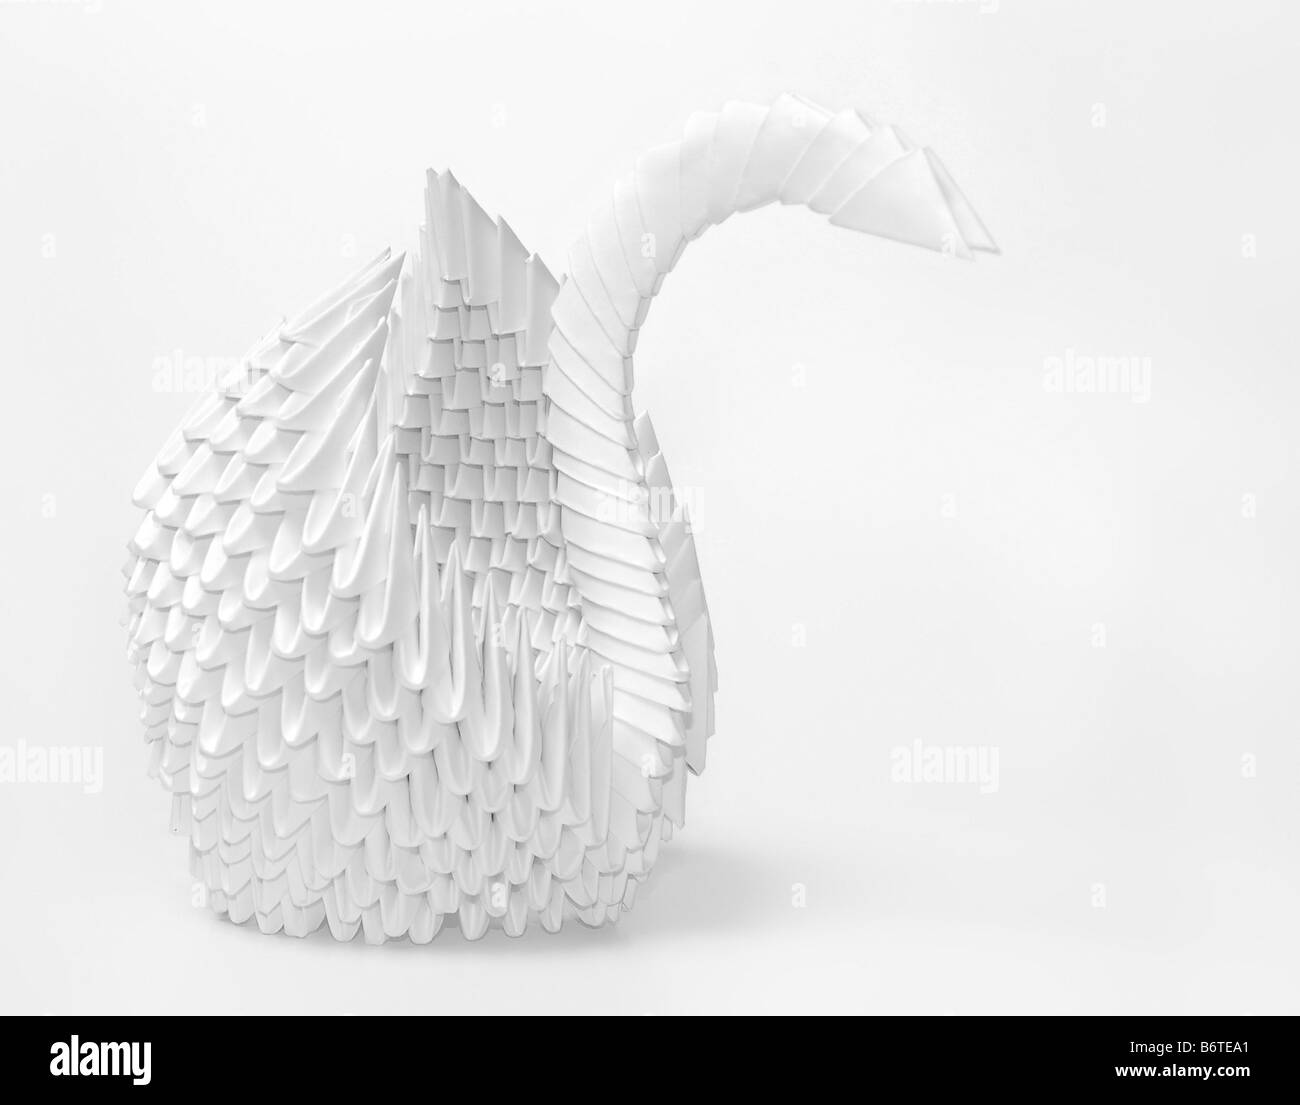 Origami Black and White Stock Photos & Images - Alamy